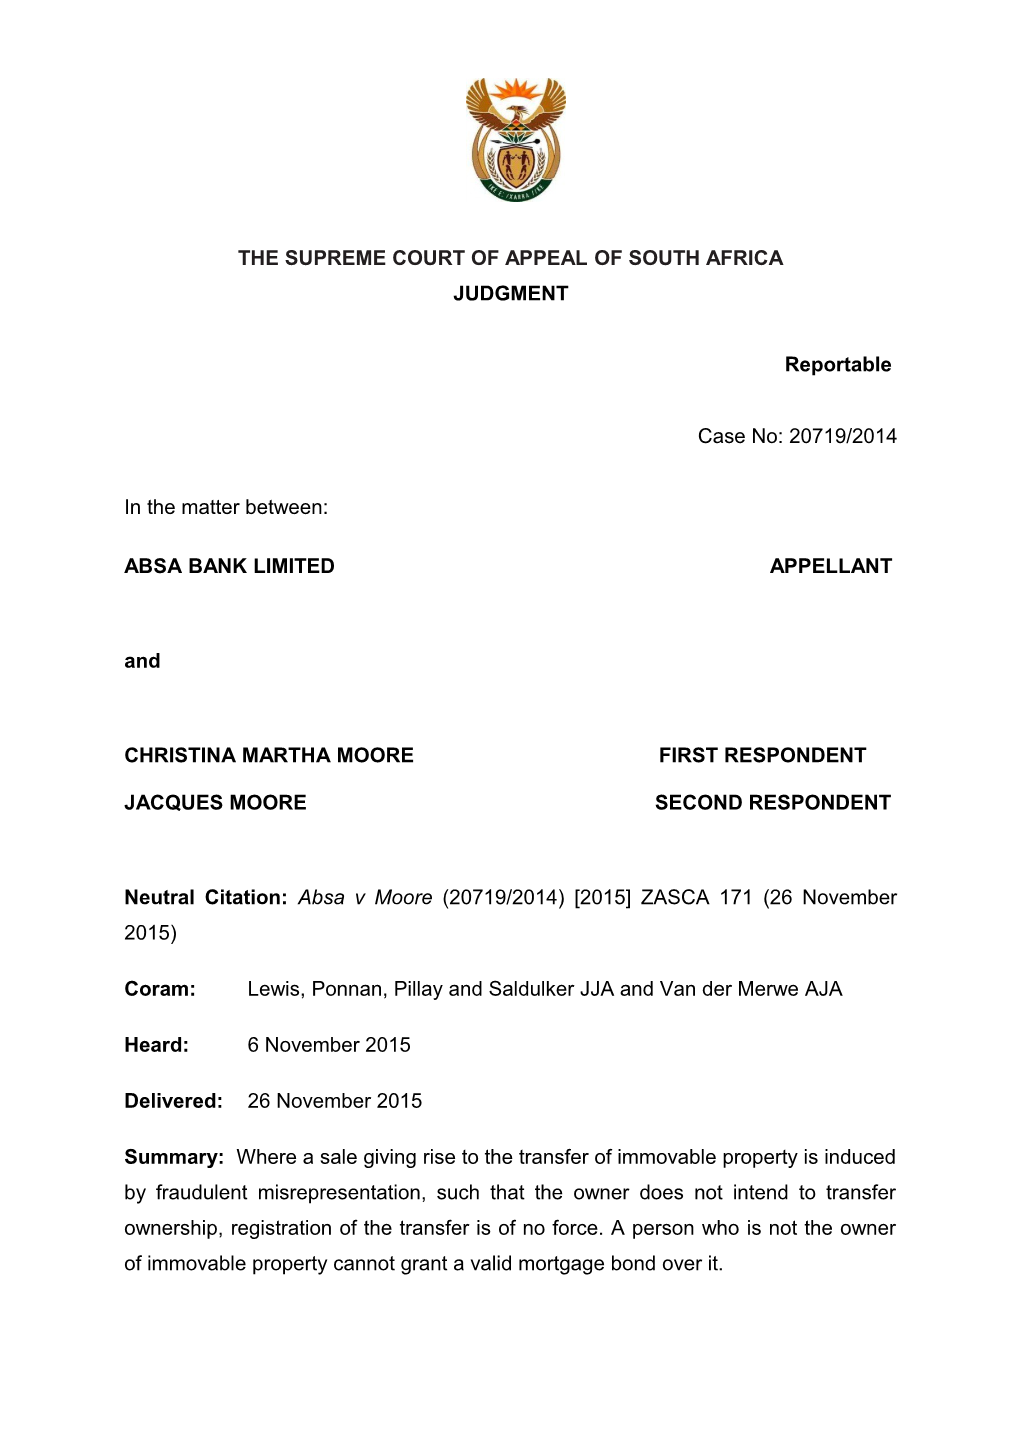 The Supreme Court of Appeal of South Africa s24